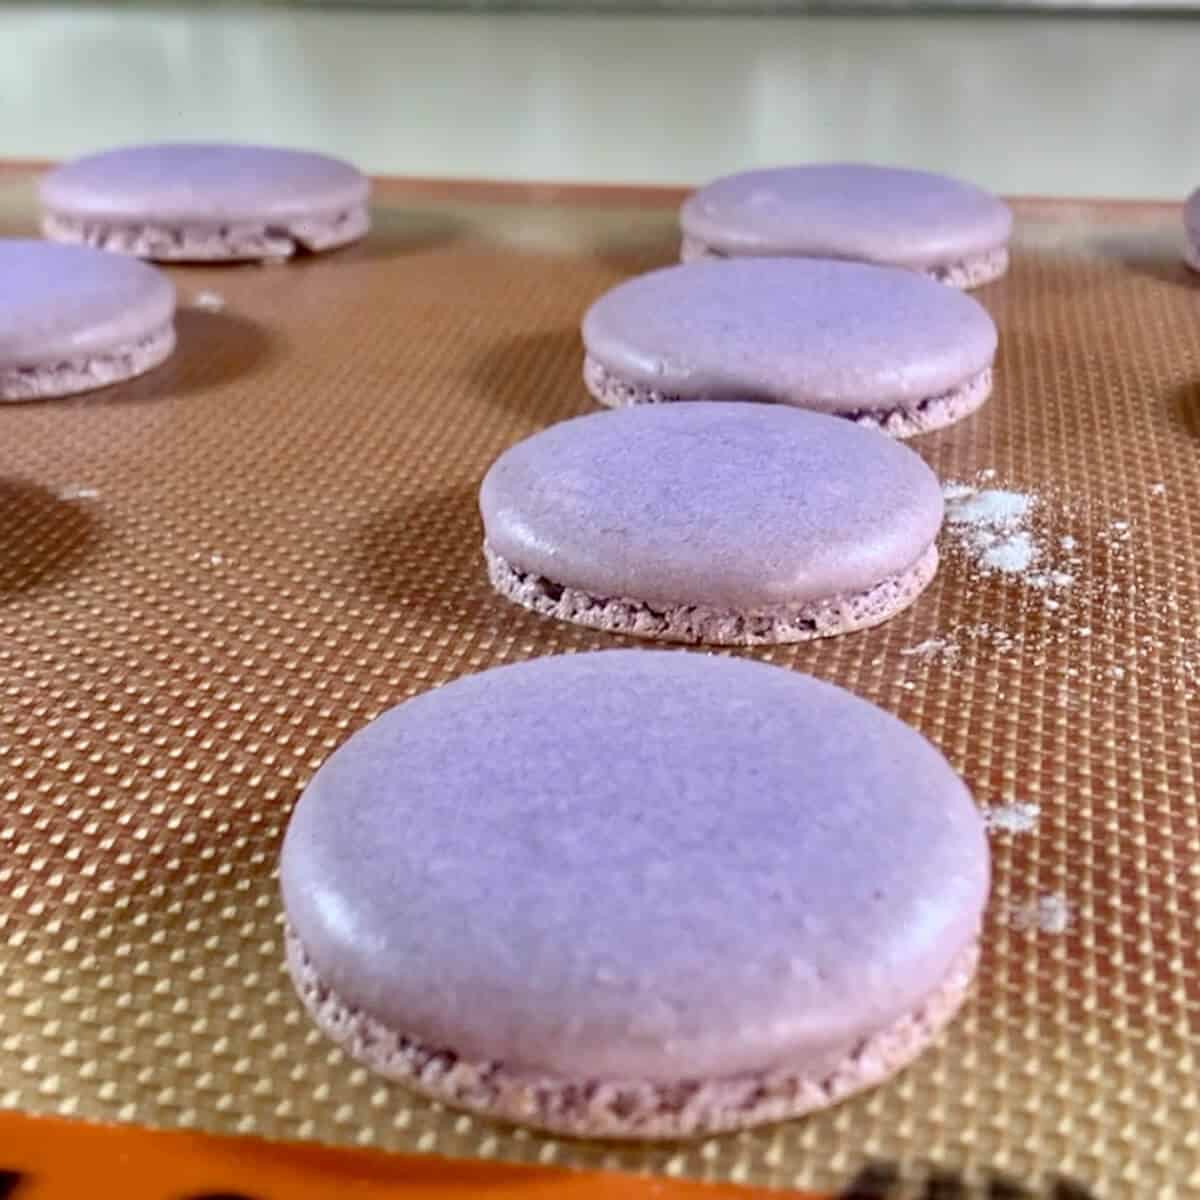 Closeup of purple french macarons on a silpat lined baking pan after baking.